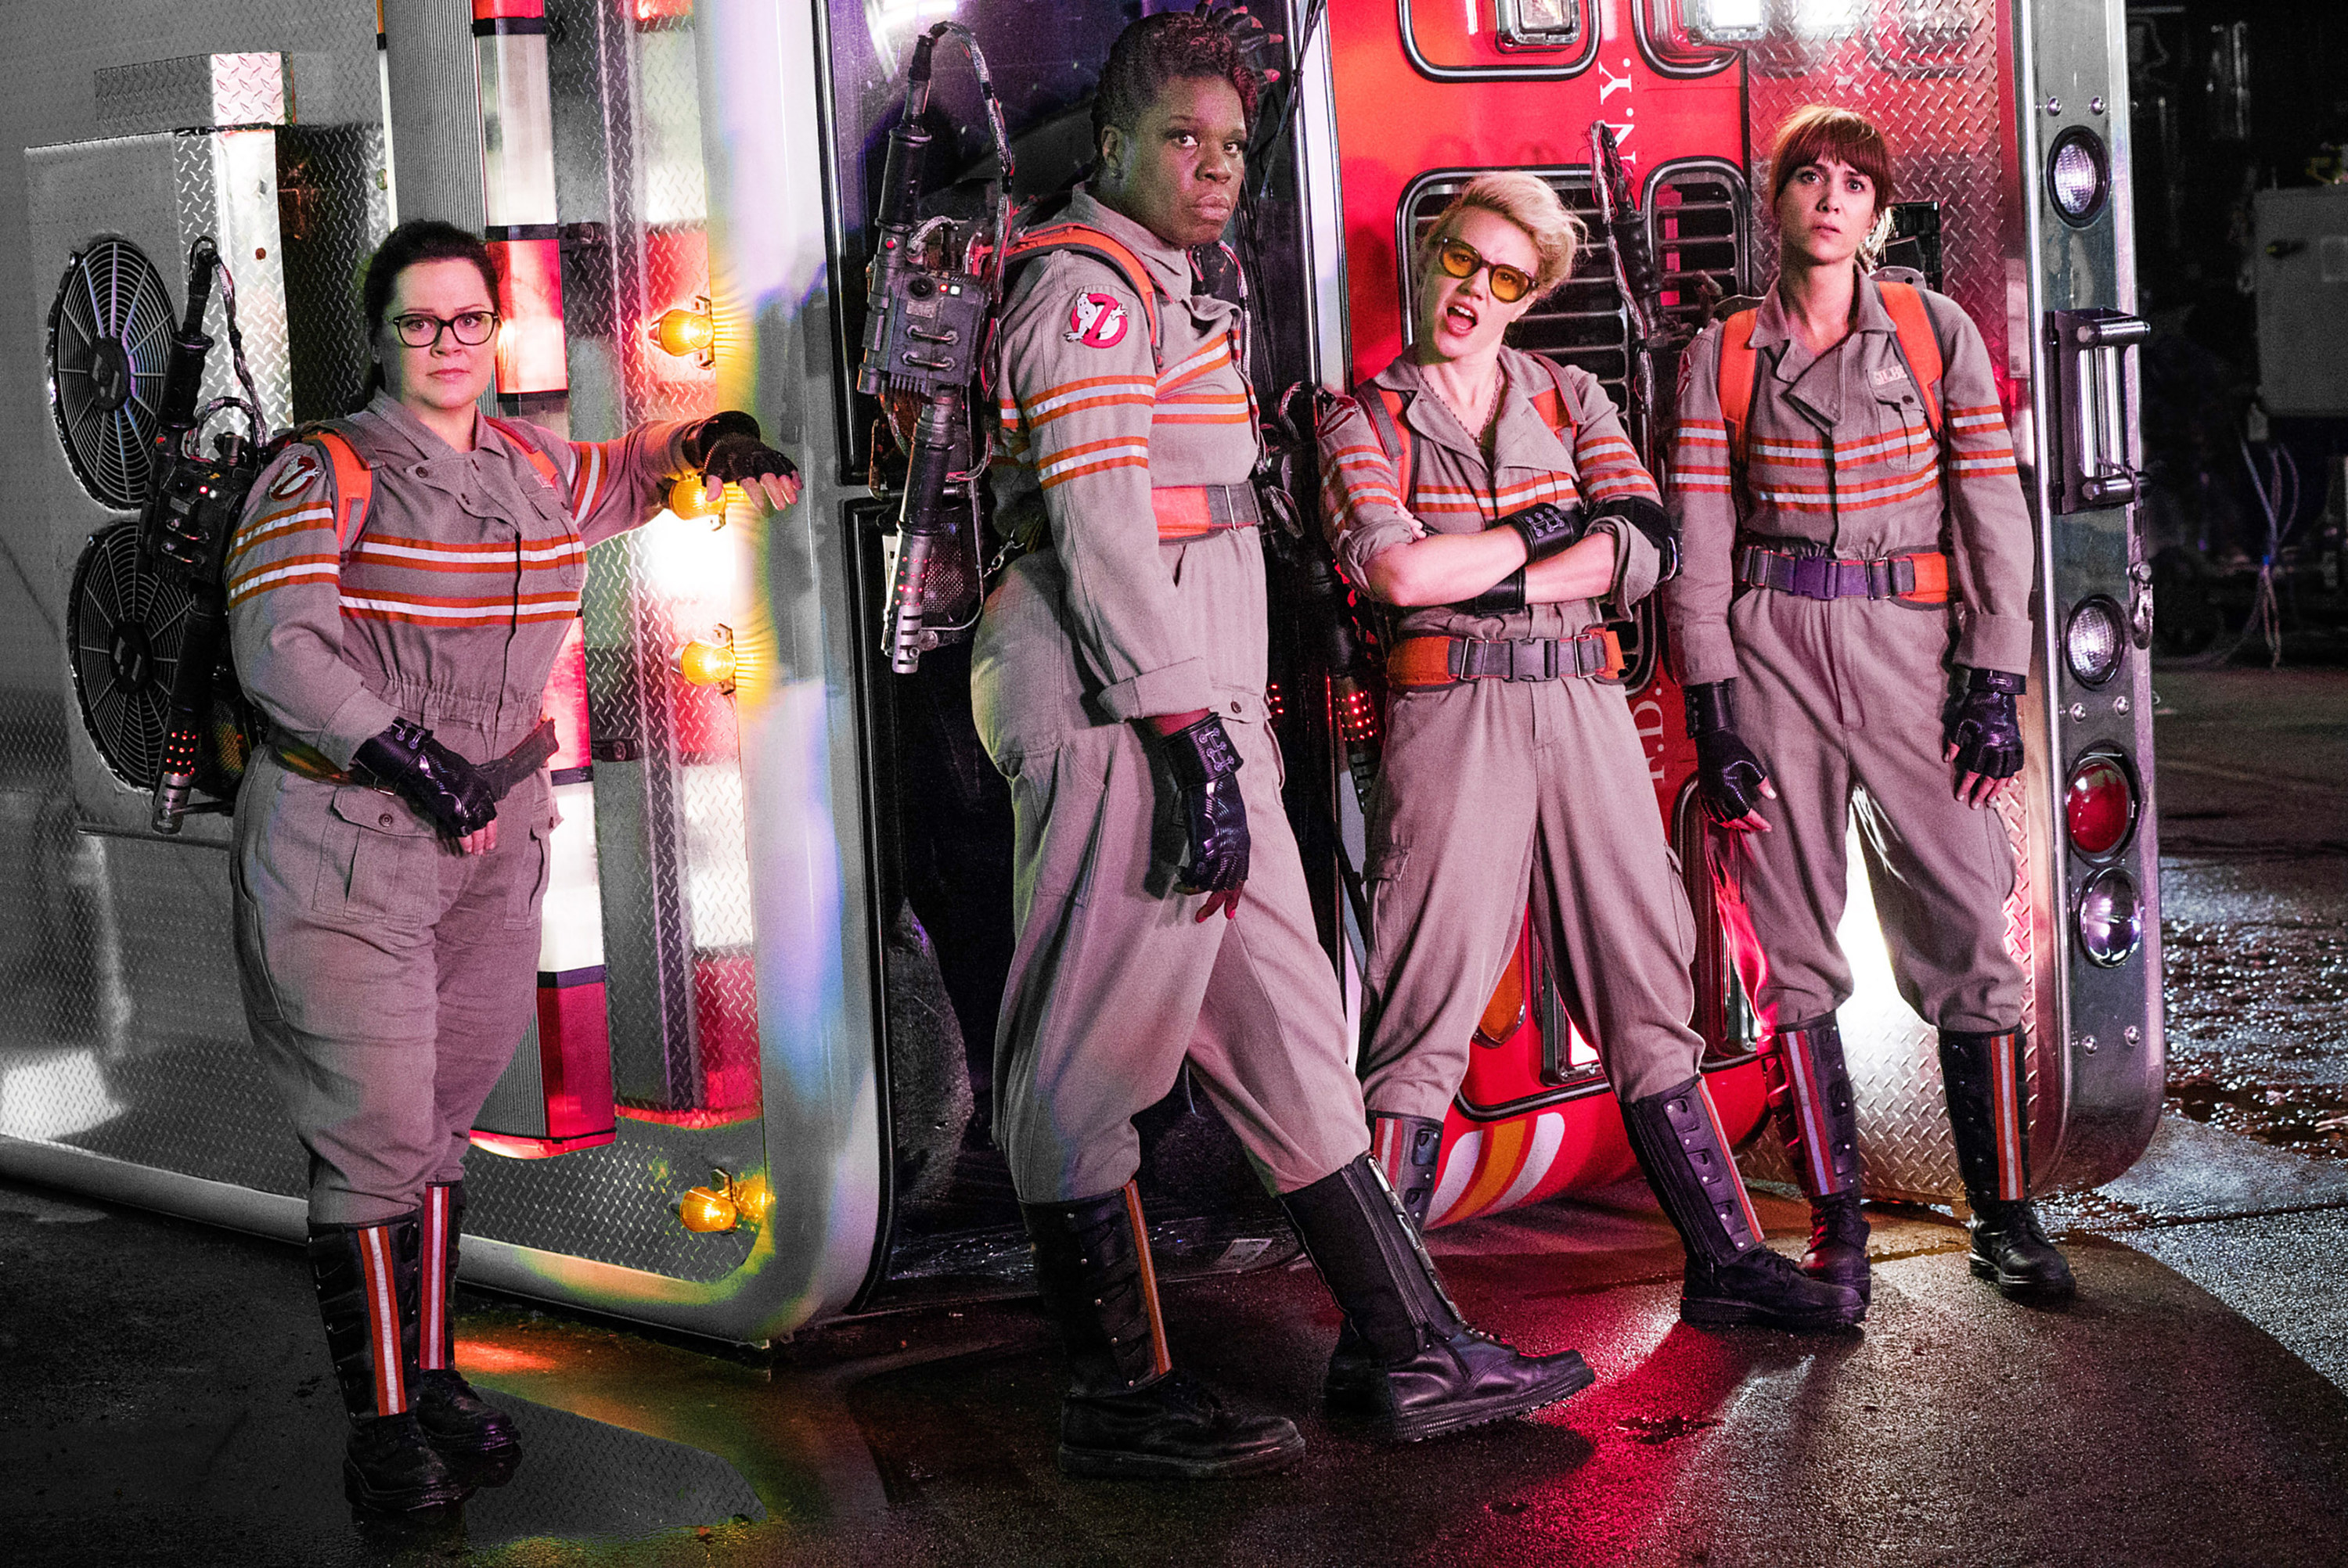 the main cast in their ghostbusters uniforms